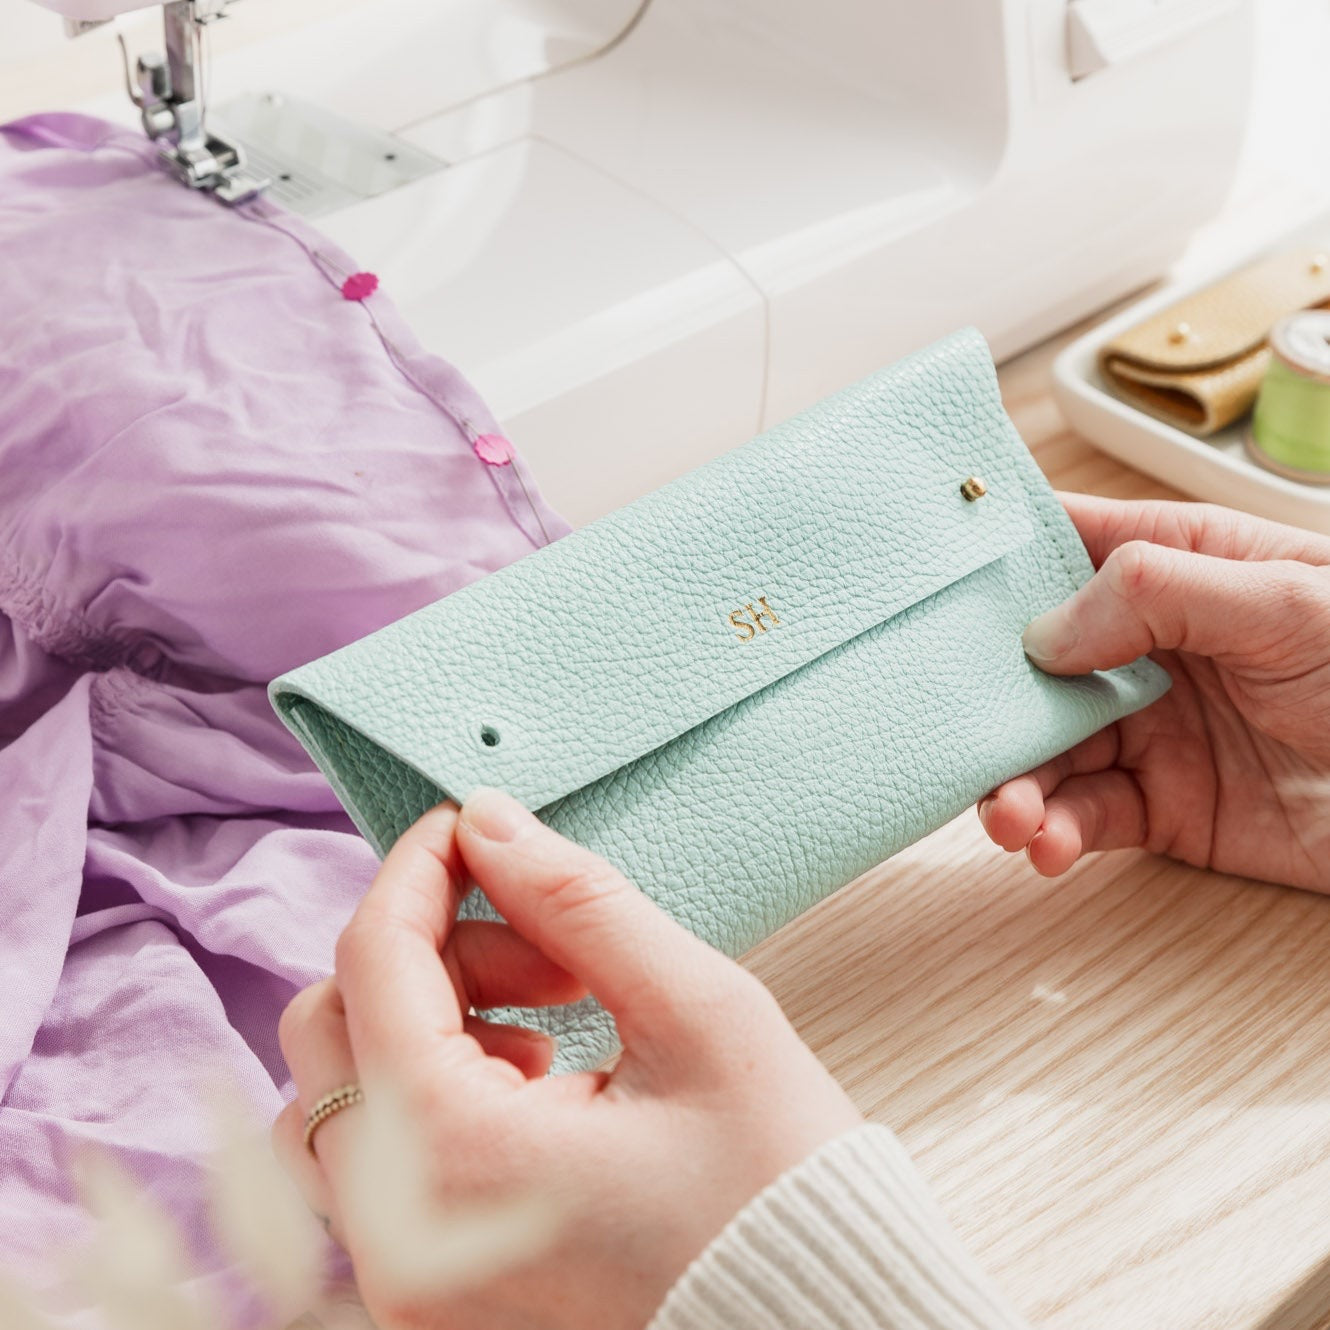 Sewer holds light turquoise leather sewing case with two metal studs while she sews lilac dress. The leather pouch is personalised with the initials SH.